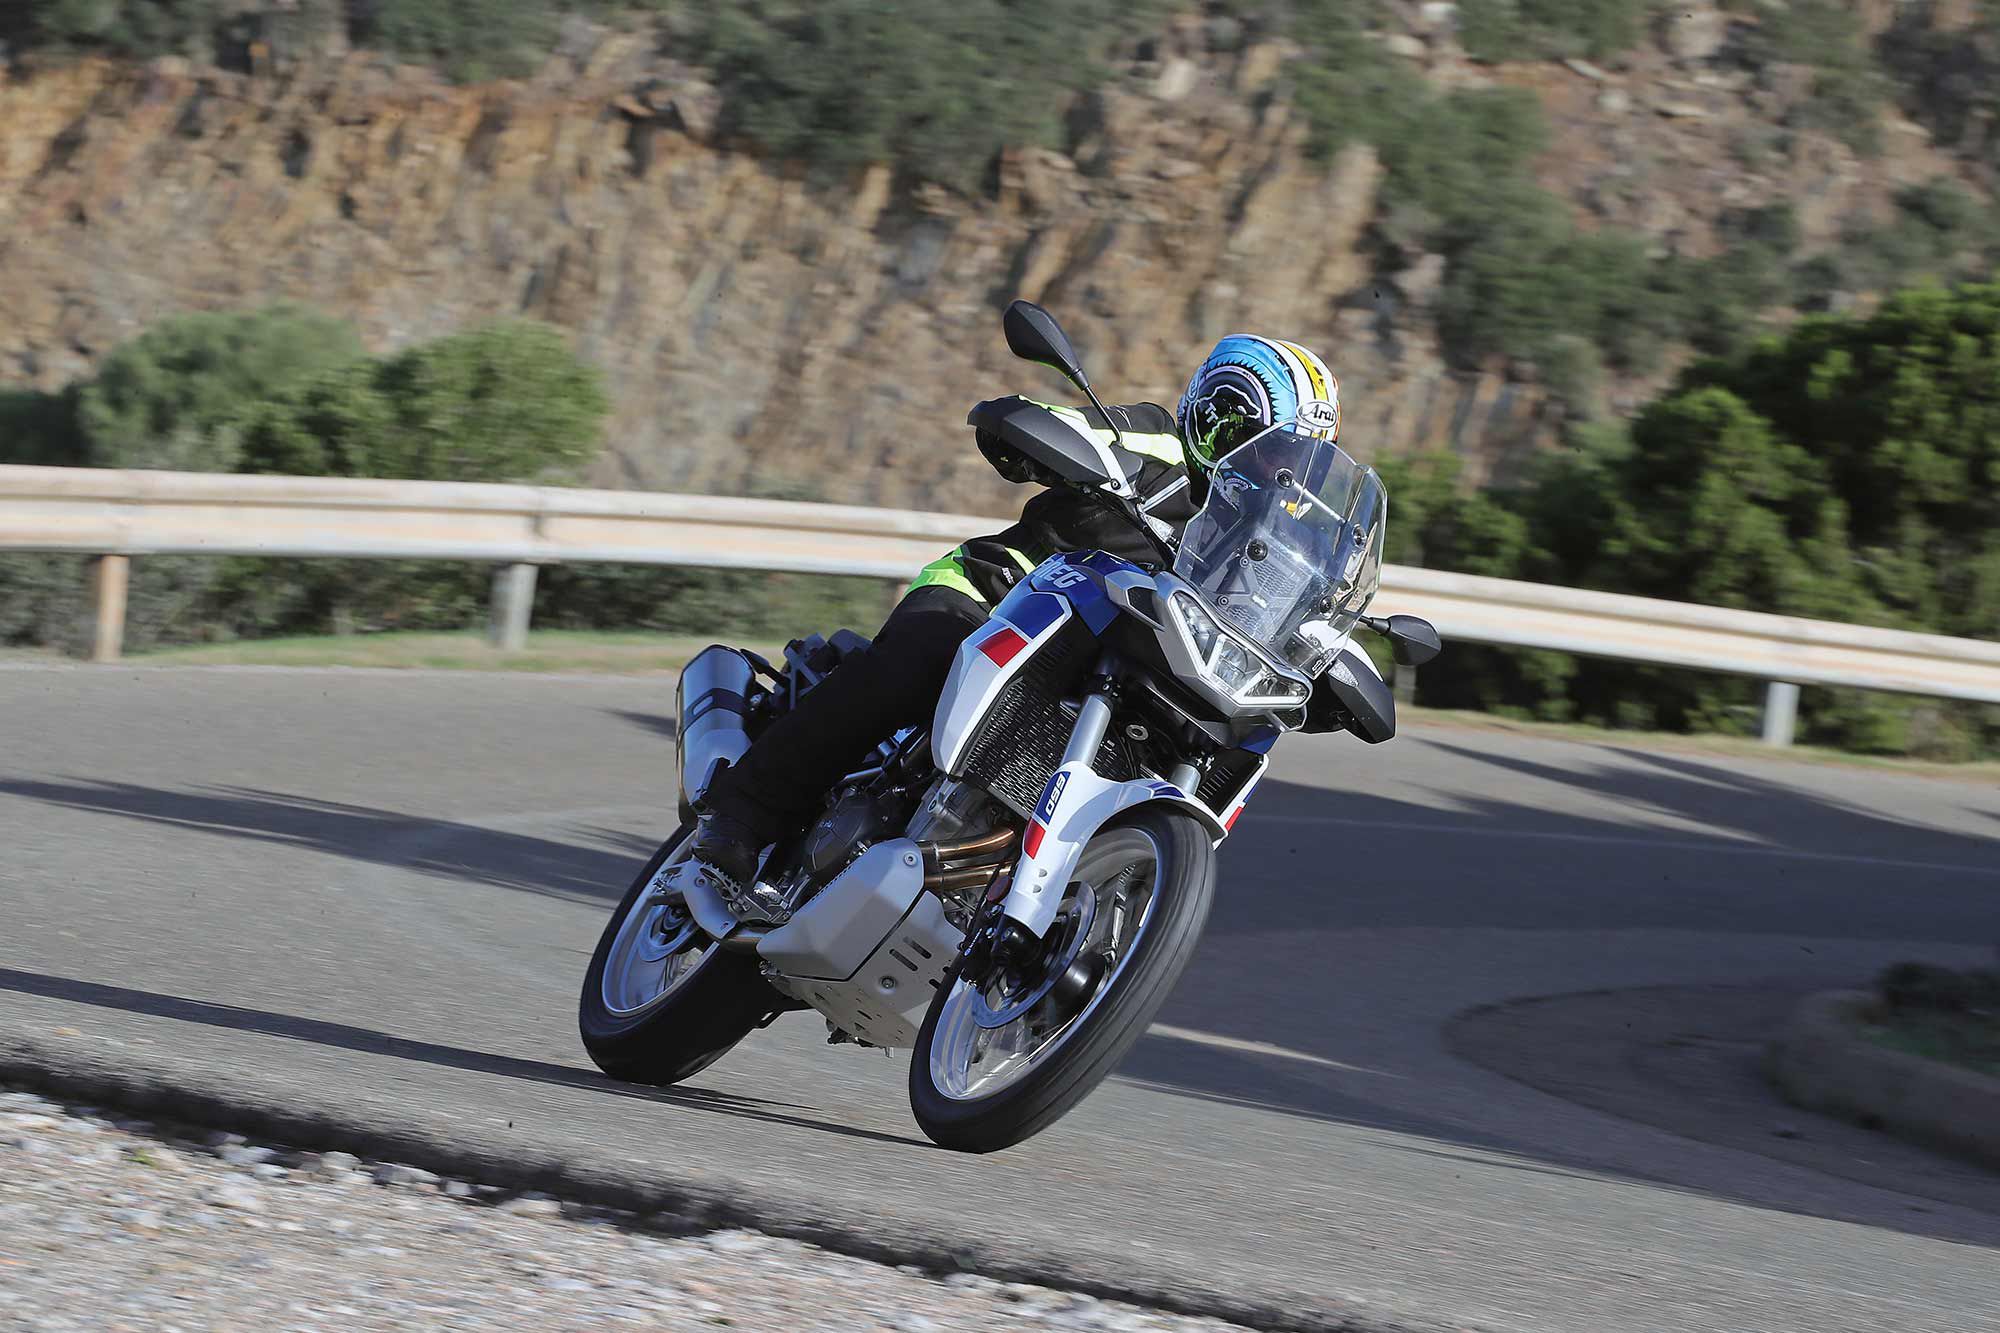 Aprilia quoted 58.8 US mpg (4.0/100km). A 4.8-gallon fuel tank will give a theoretical tank range of more than 282 miles.